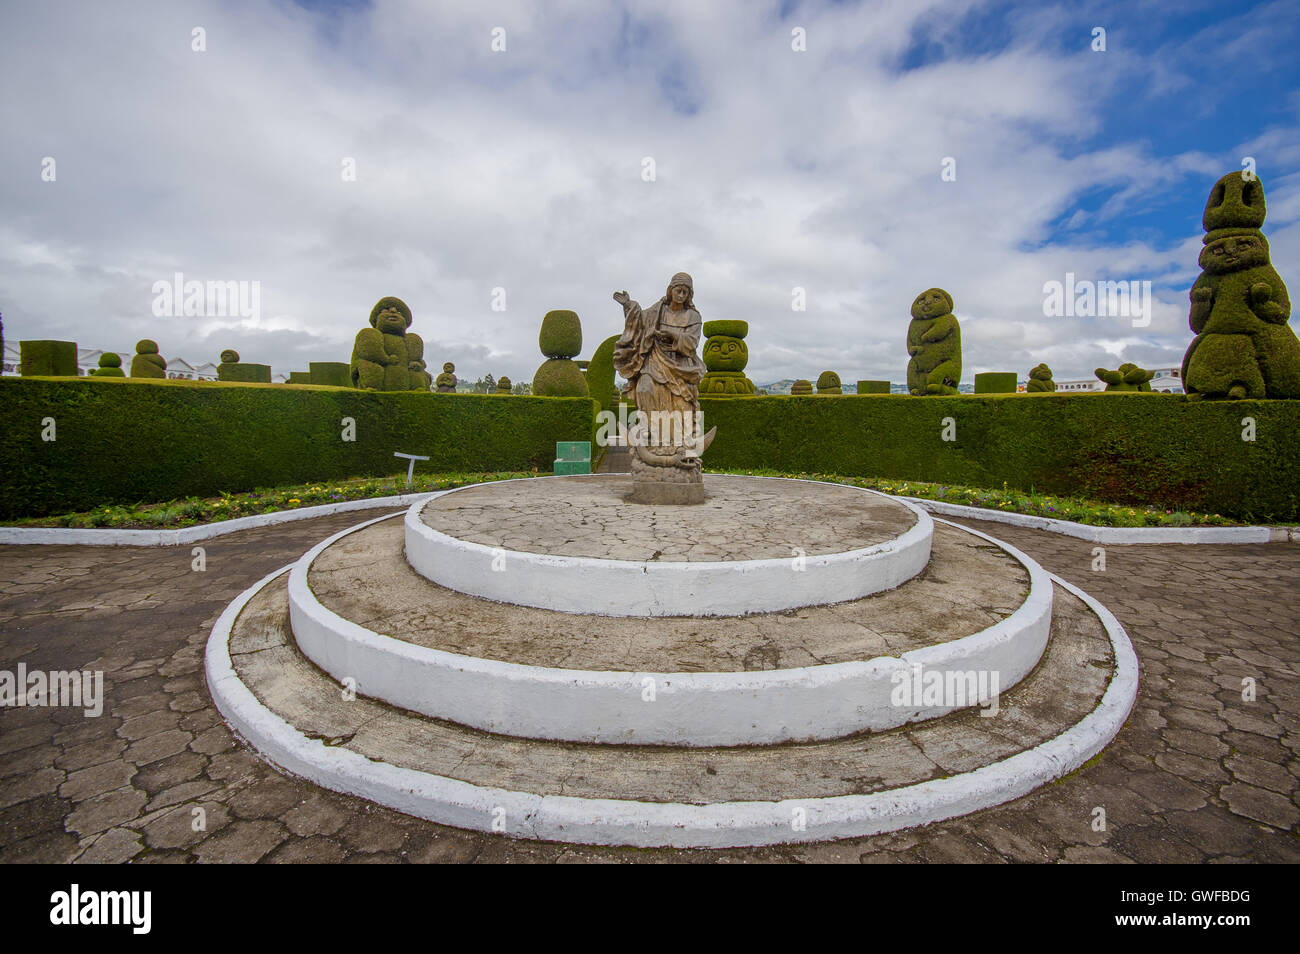 TULCAN, ECUADOR - JULY 3, 2016: statue of an angel standing over a demon in the center of the cemetery surrounded by plants sculptures Stock Photo